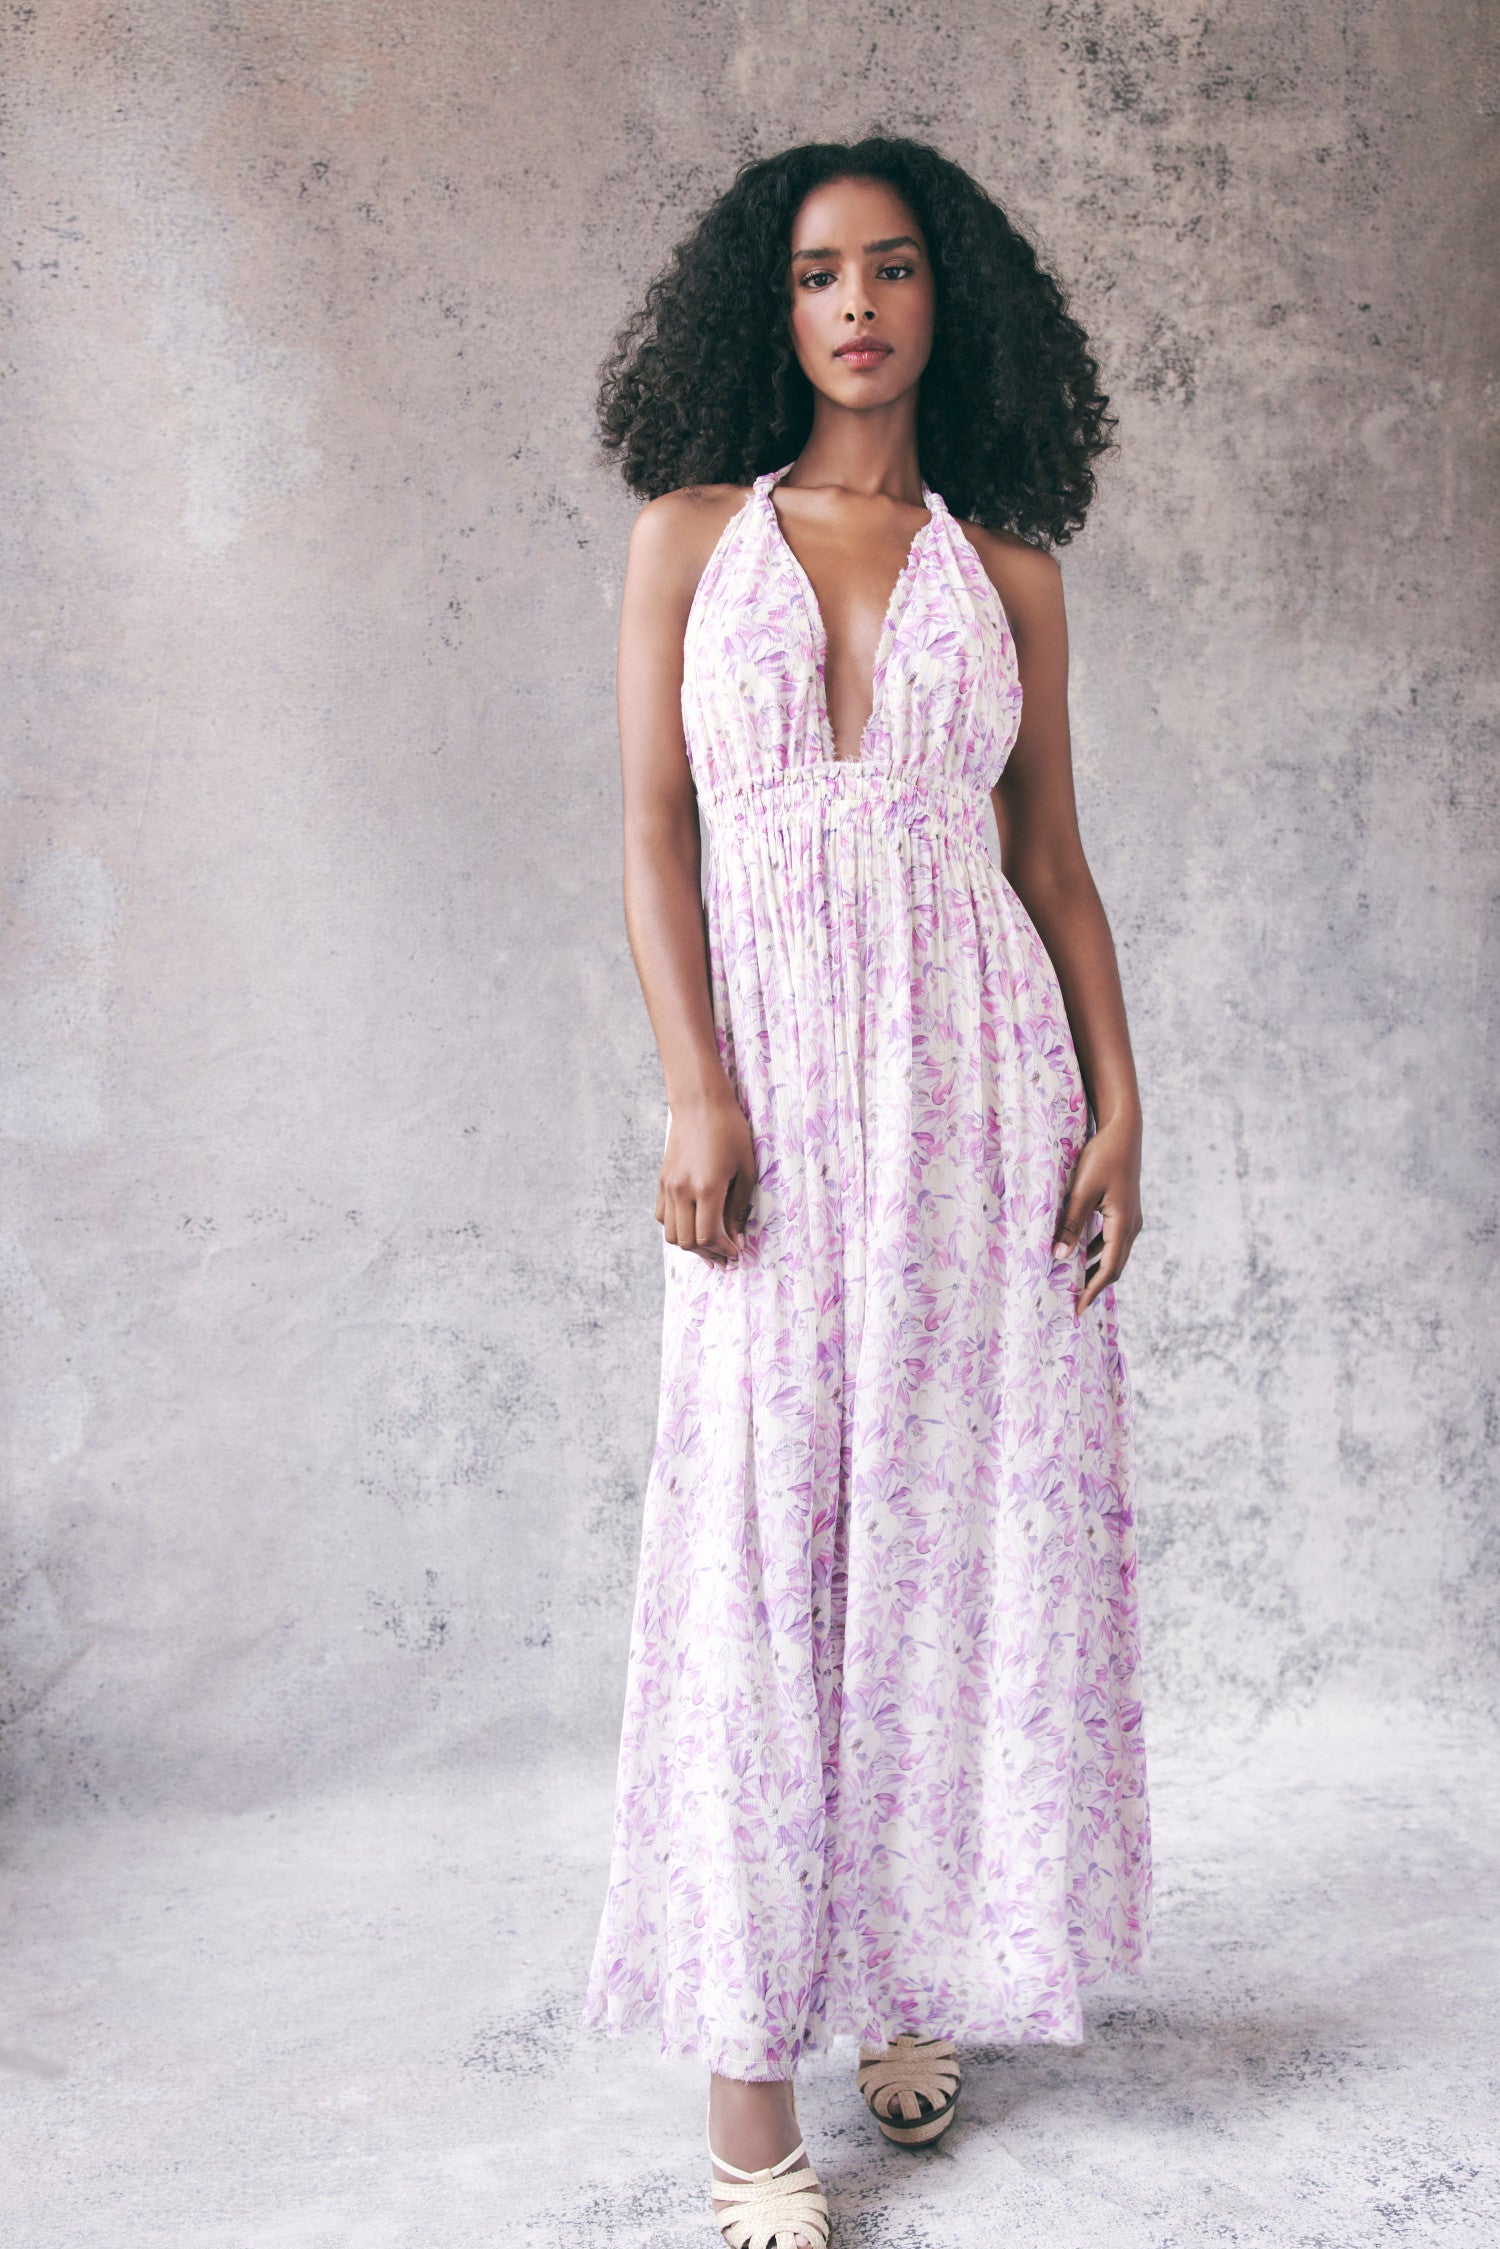 Model wearing white and purple floral halter maxi dress